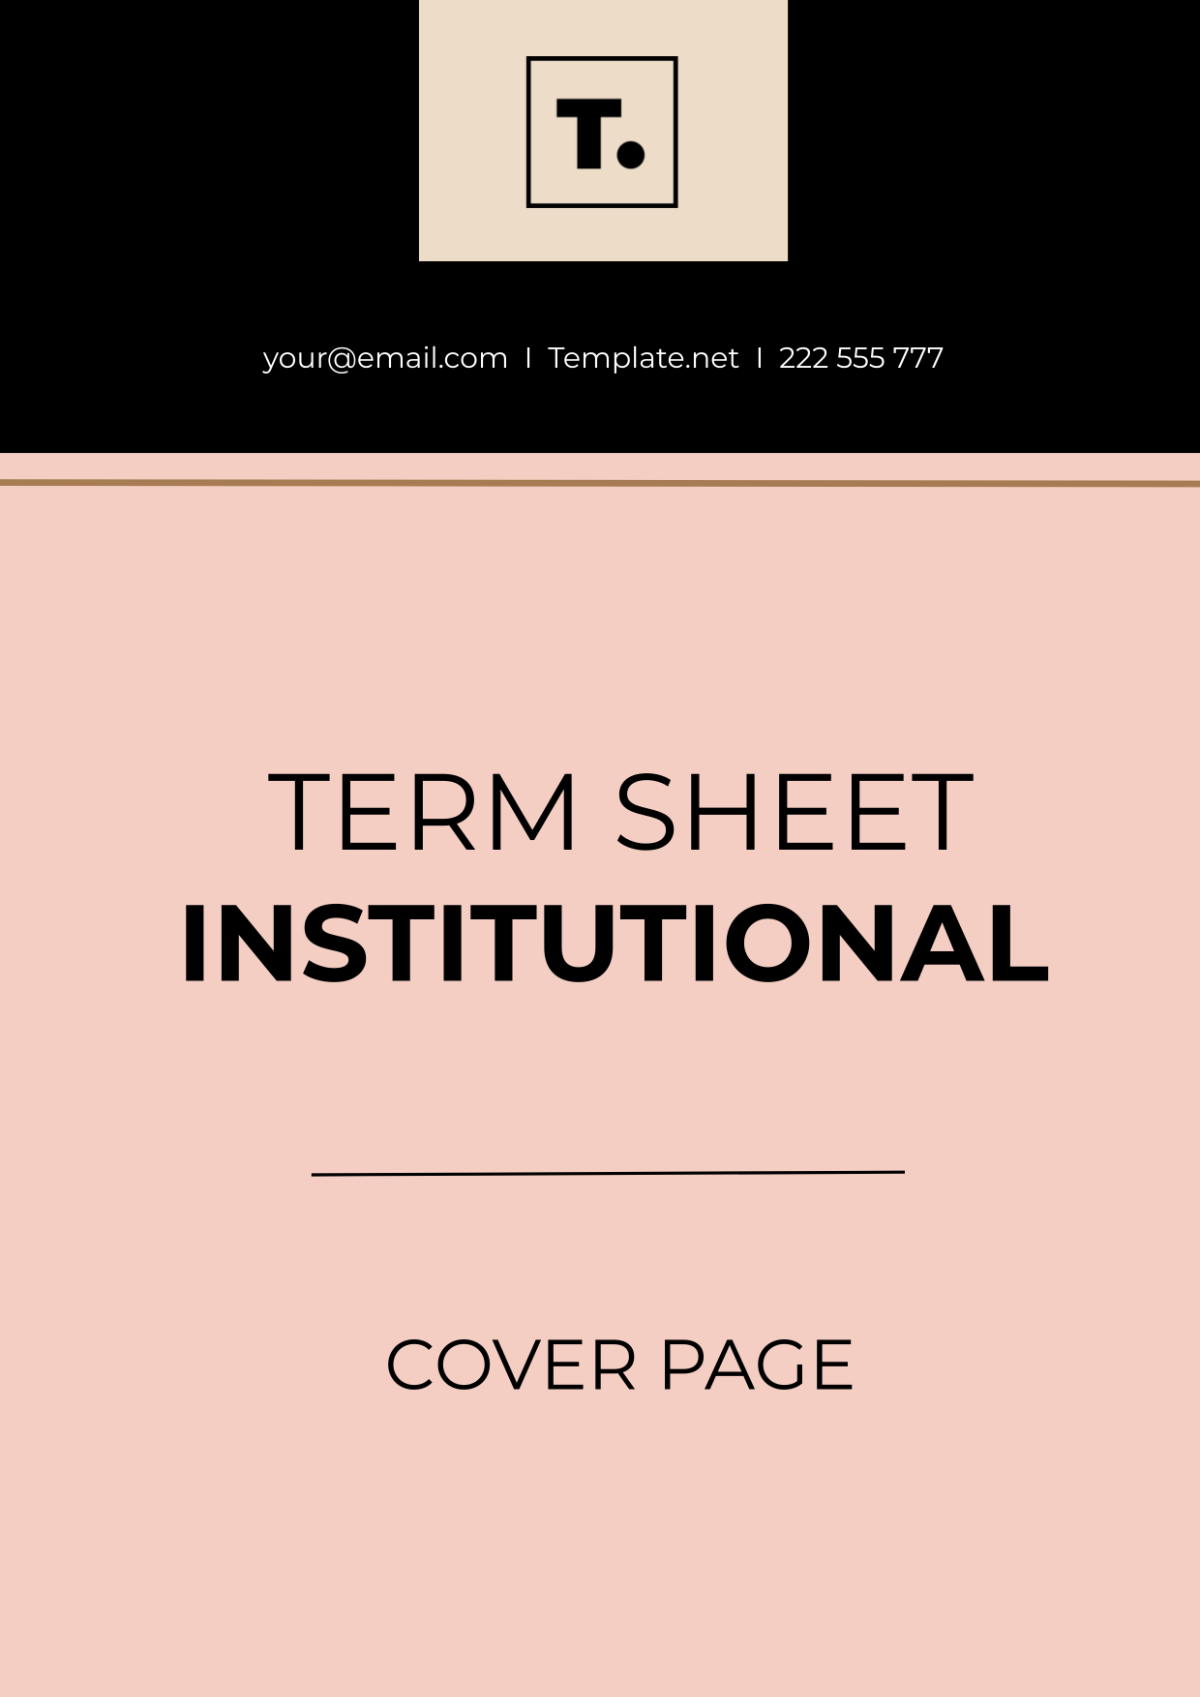 Term Sheet Institutional Cover Page